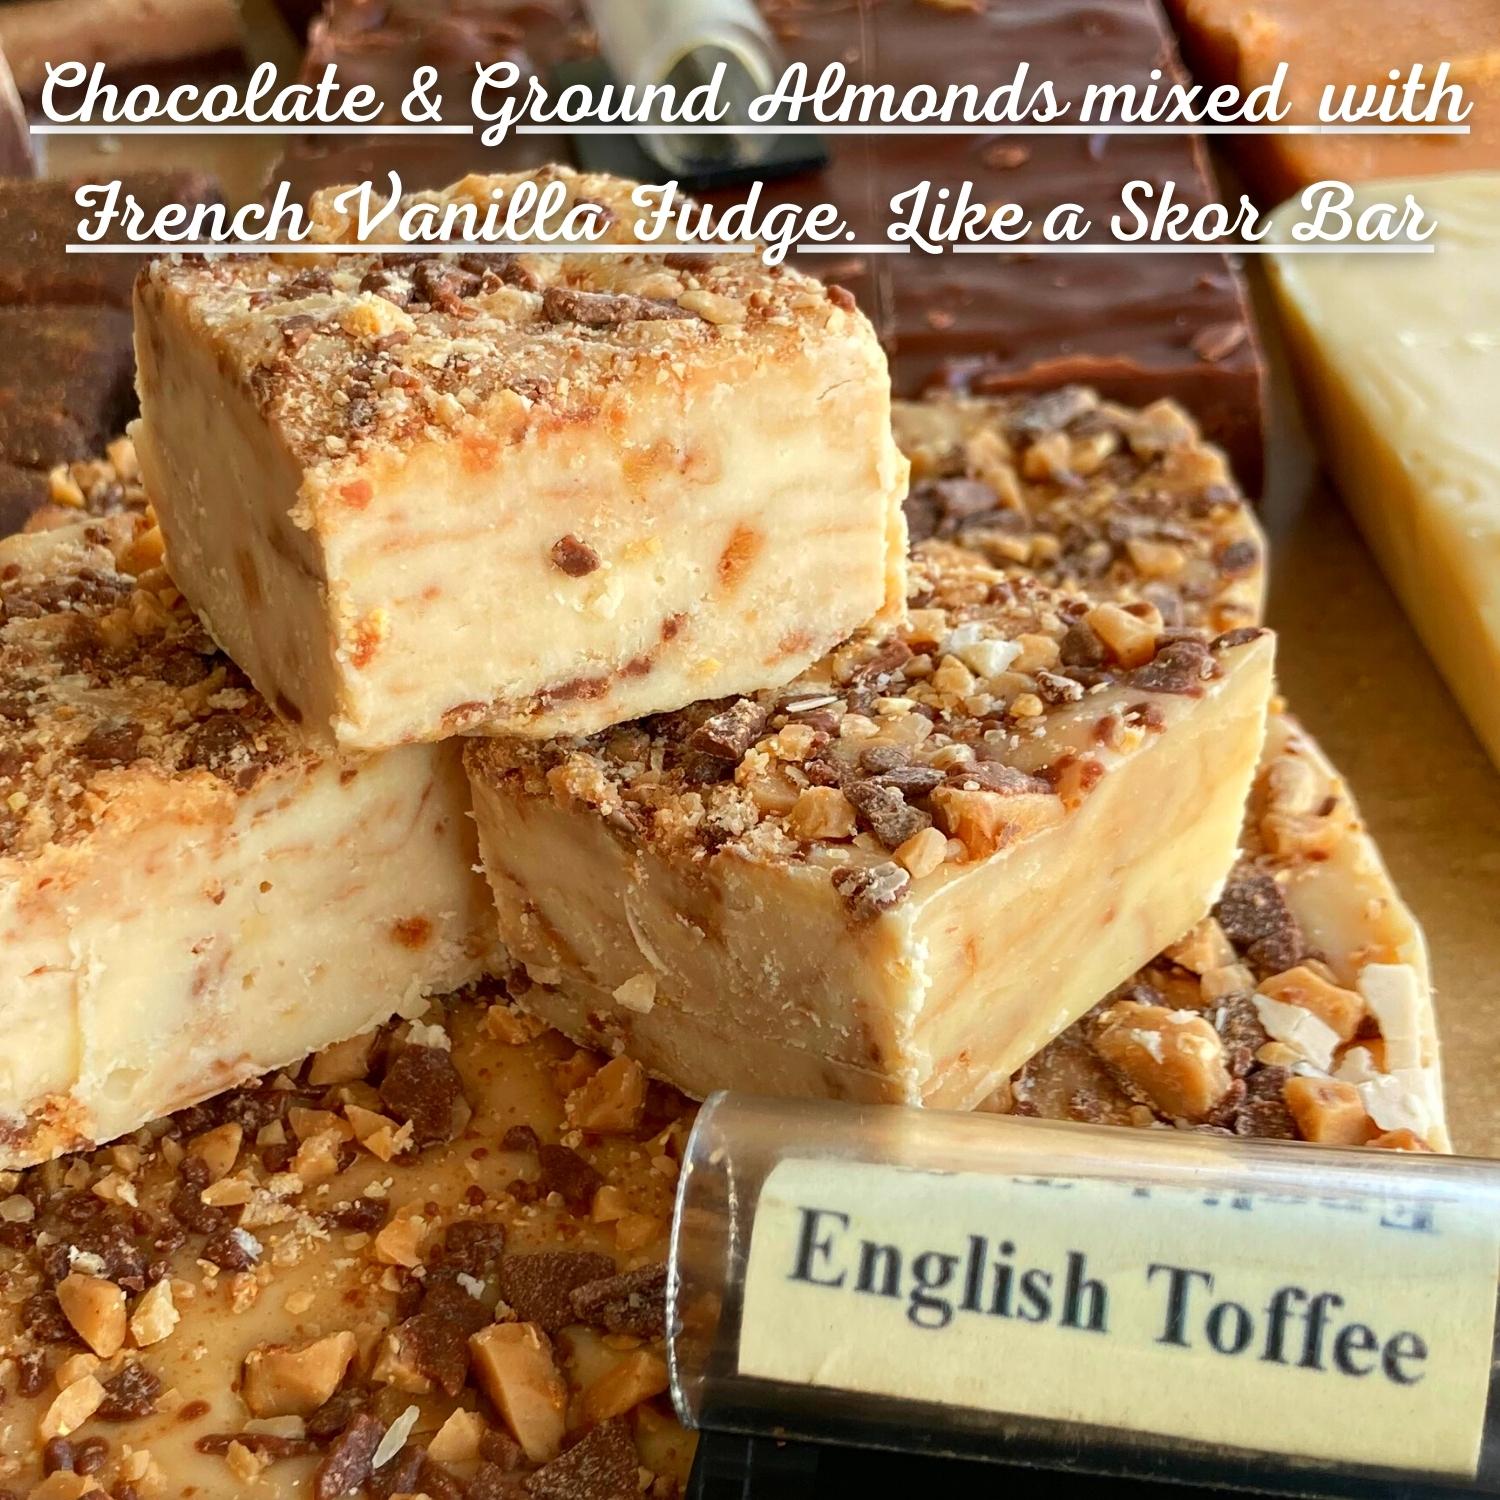 English Toffee Fudge Toffee, Chocolate & Ground Almonds mixed with French Vanilla Fudge. Like a Skor Bar